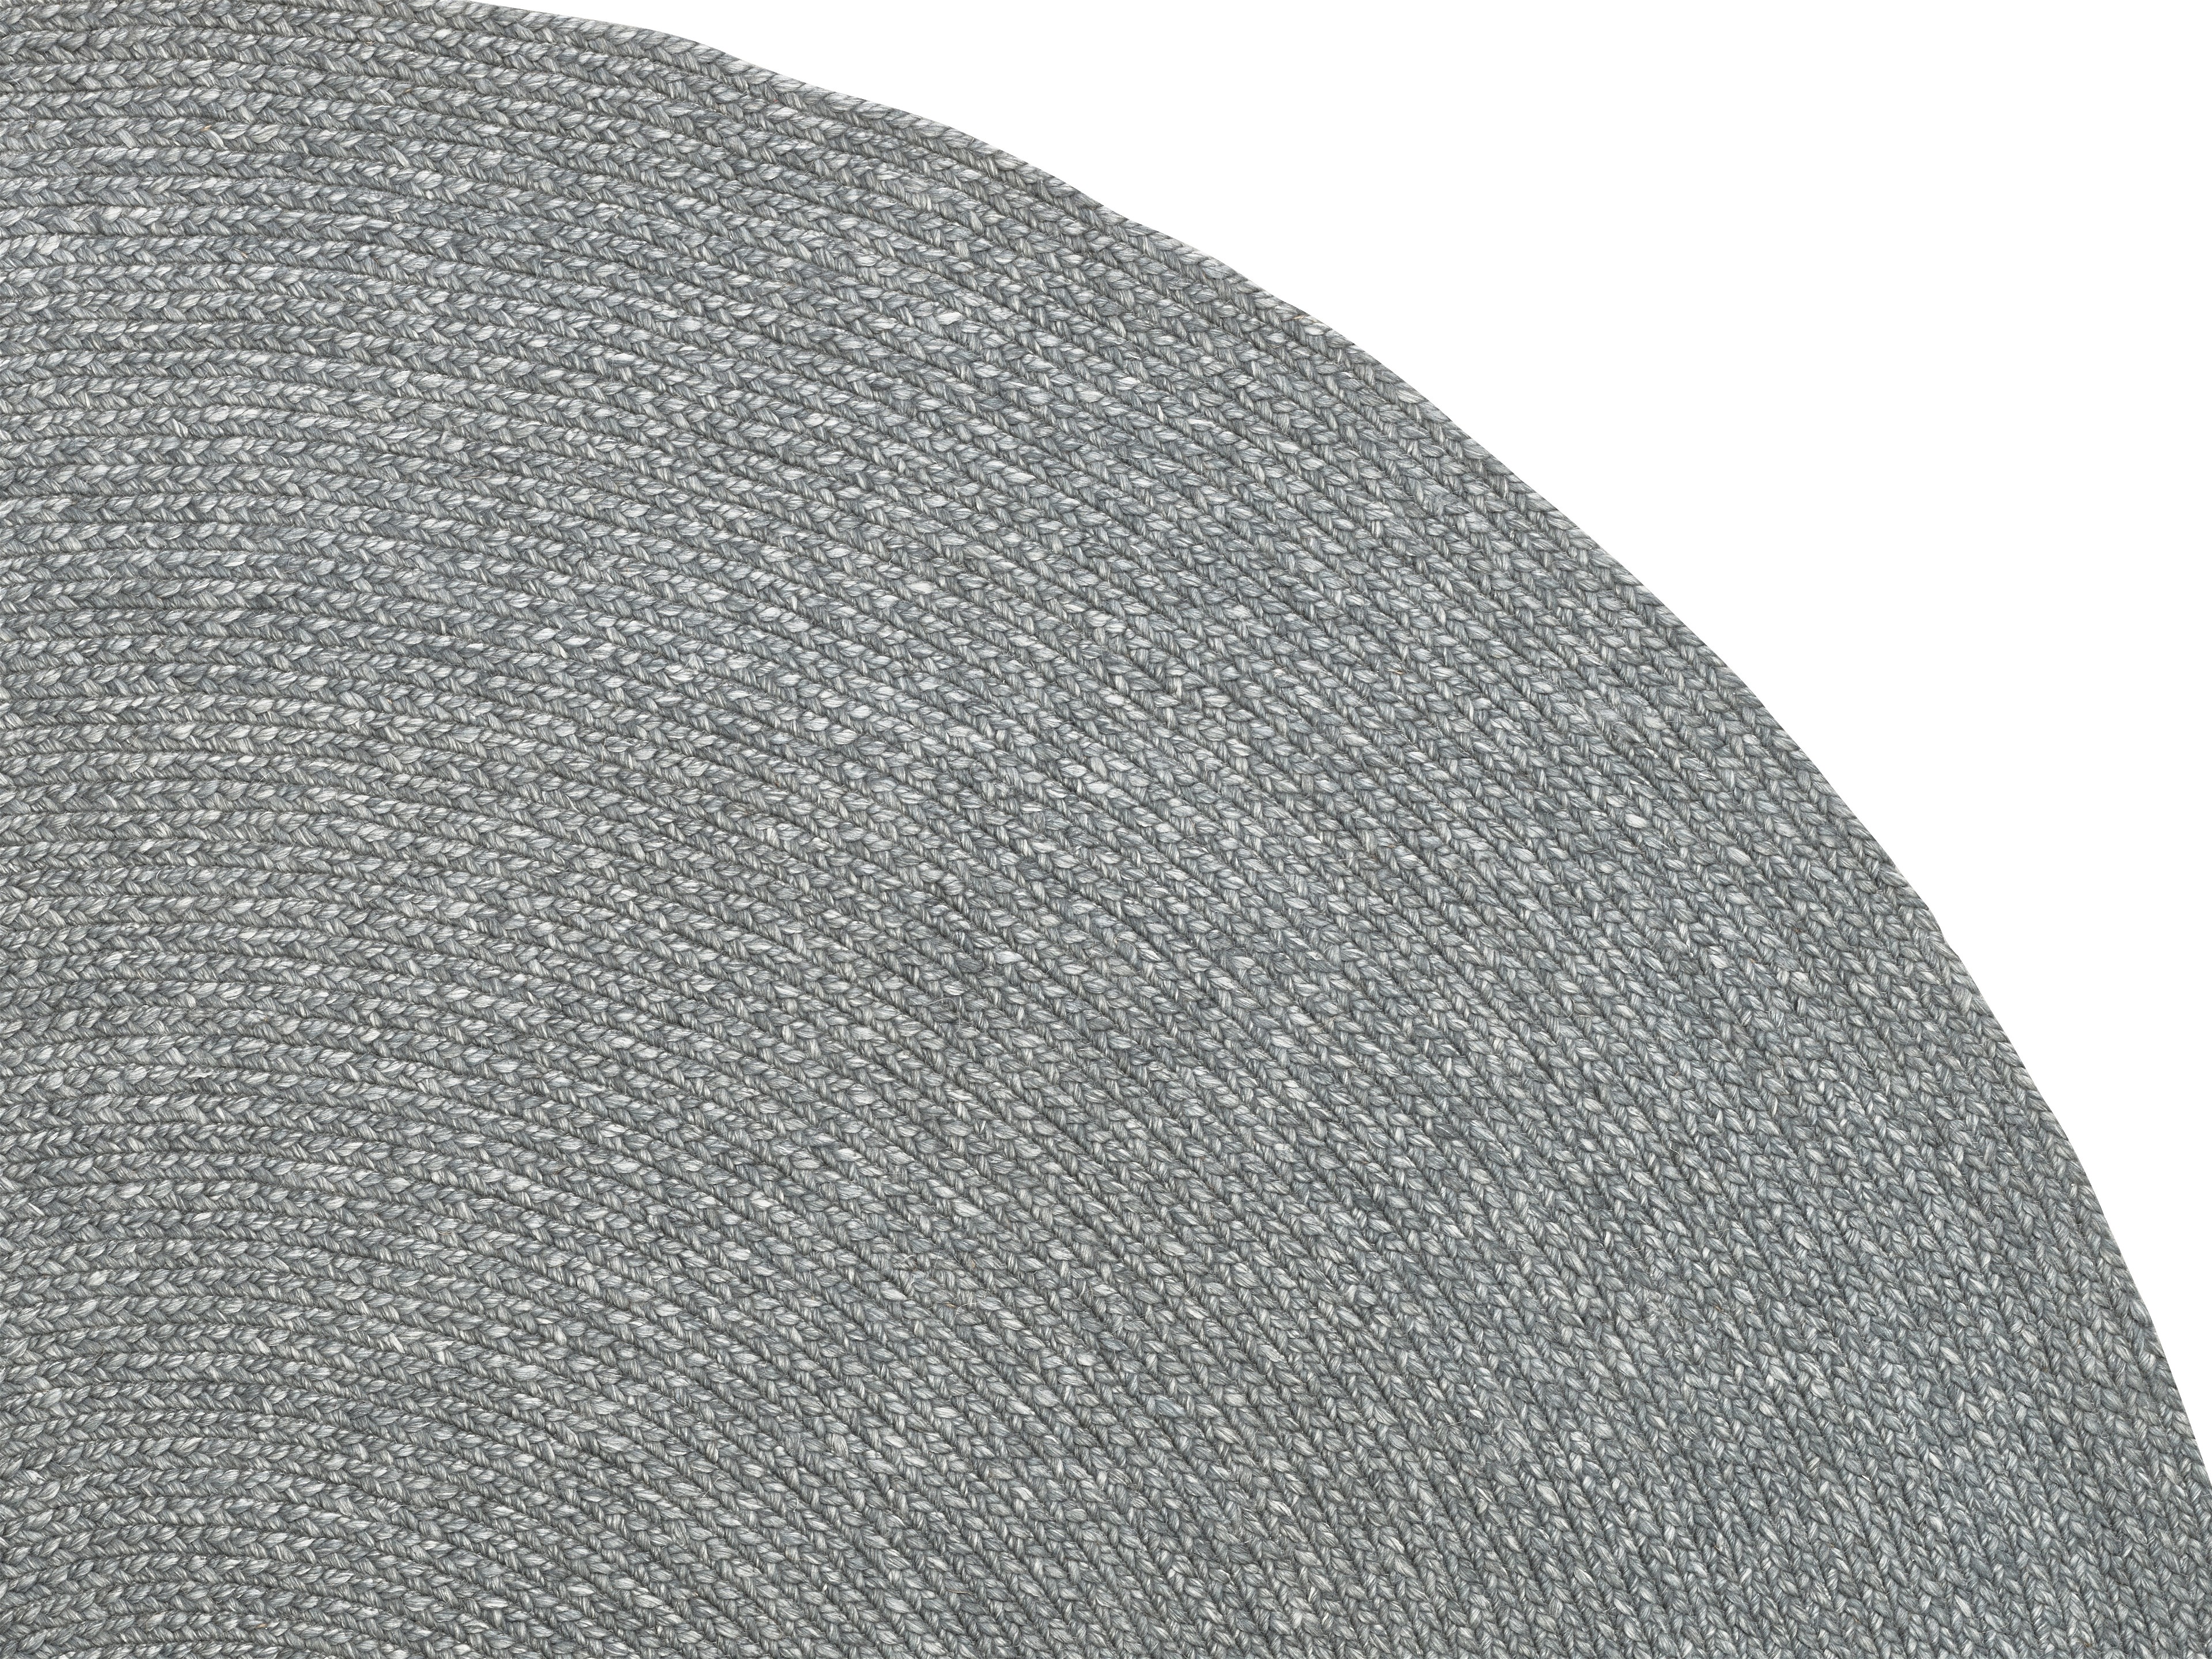 a close up of a gray rug on a white background